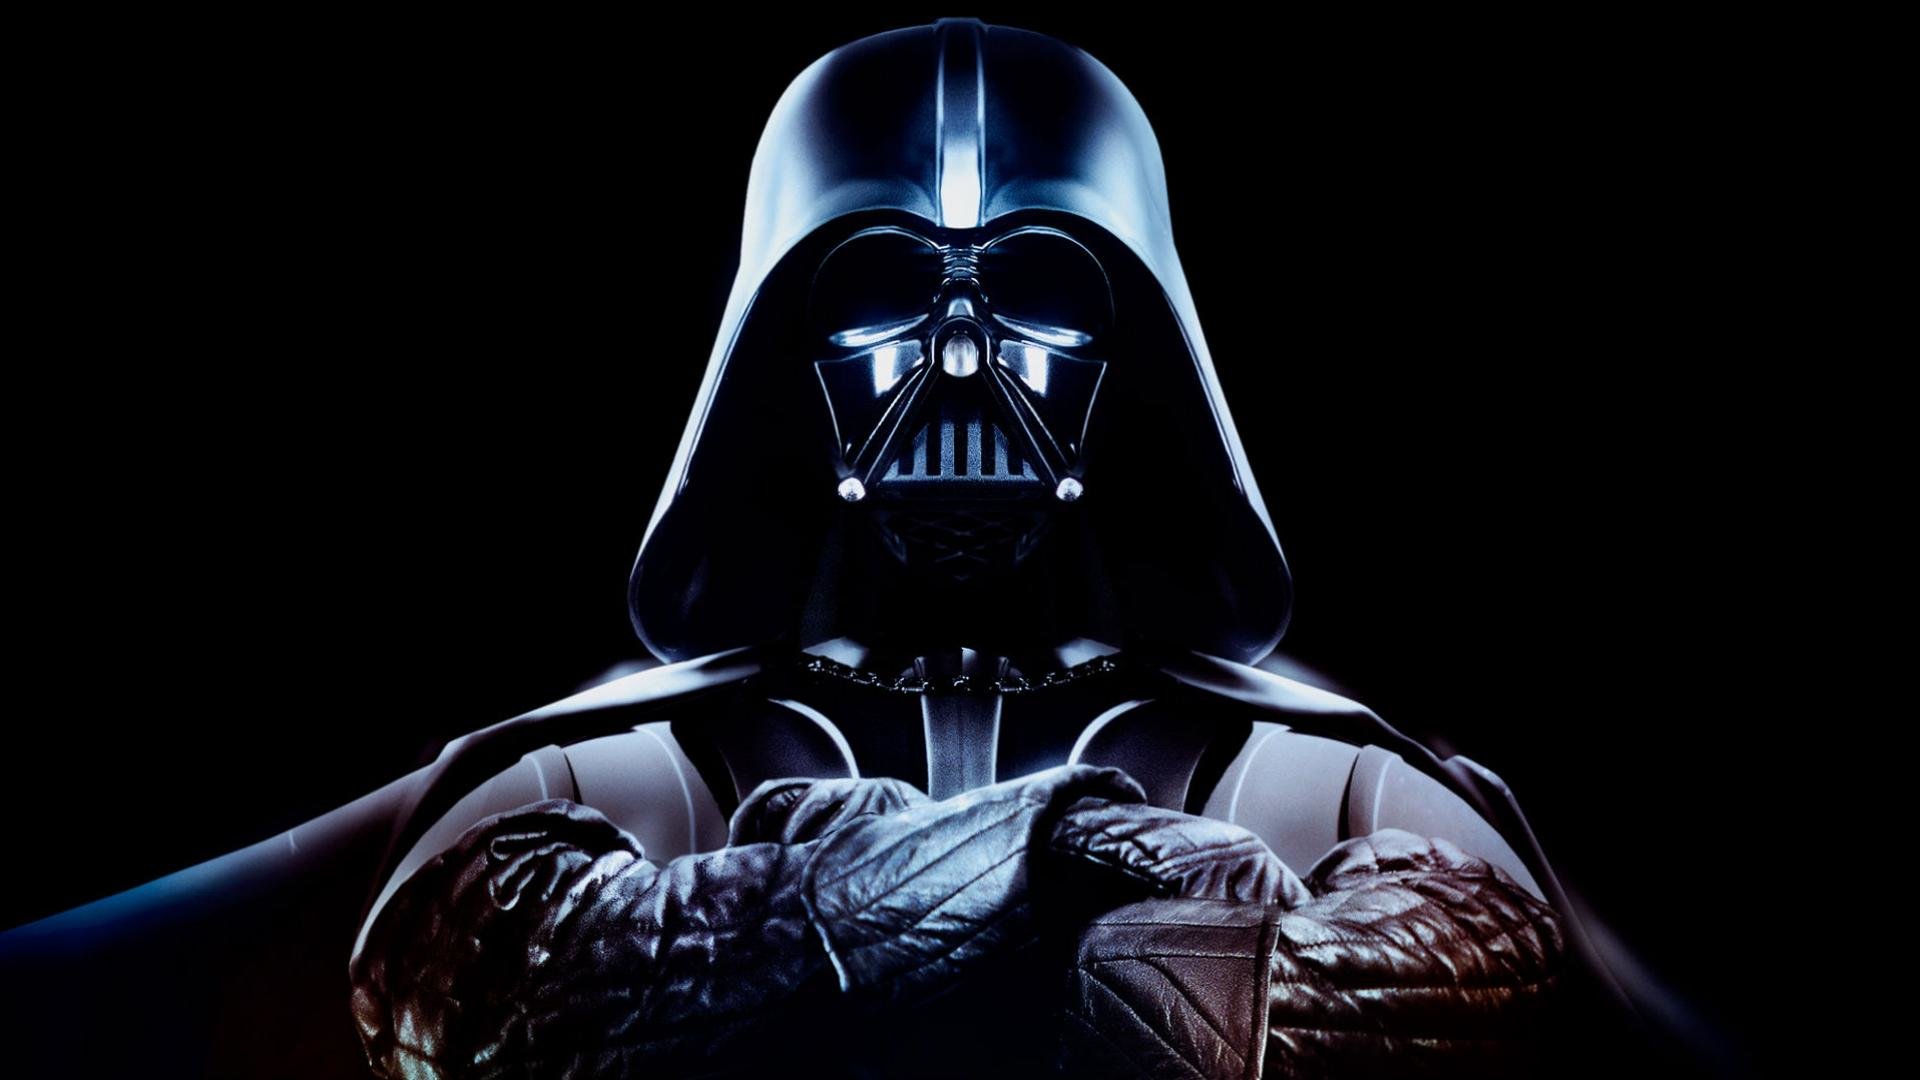 Download full hd 1080p Darth Vader PC wallpaper ID:458917 for free